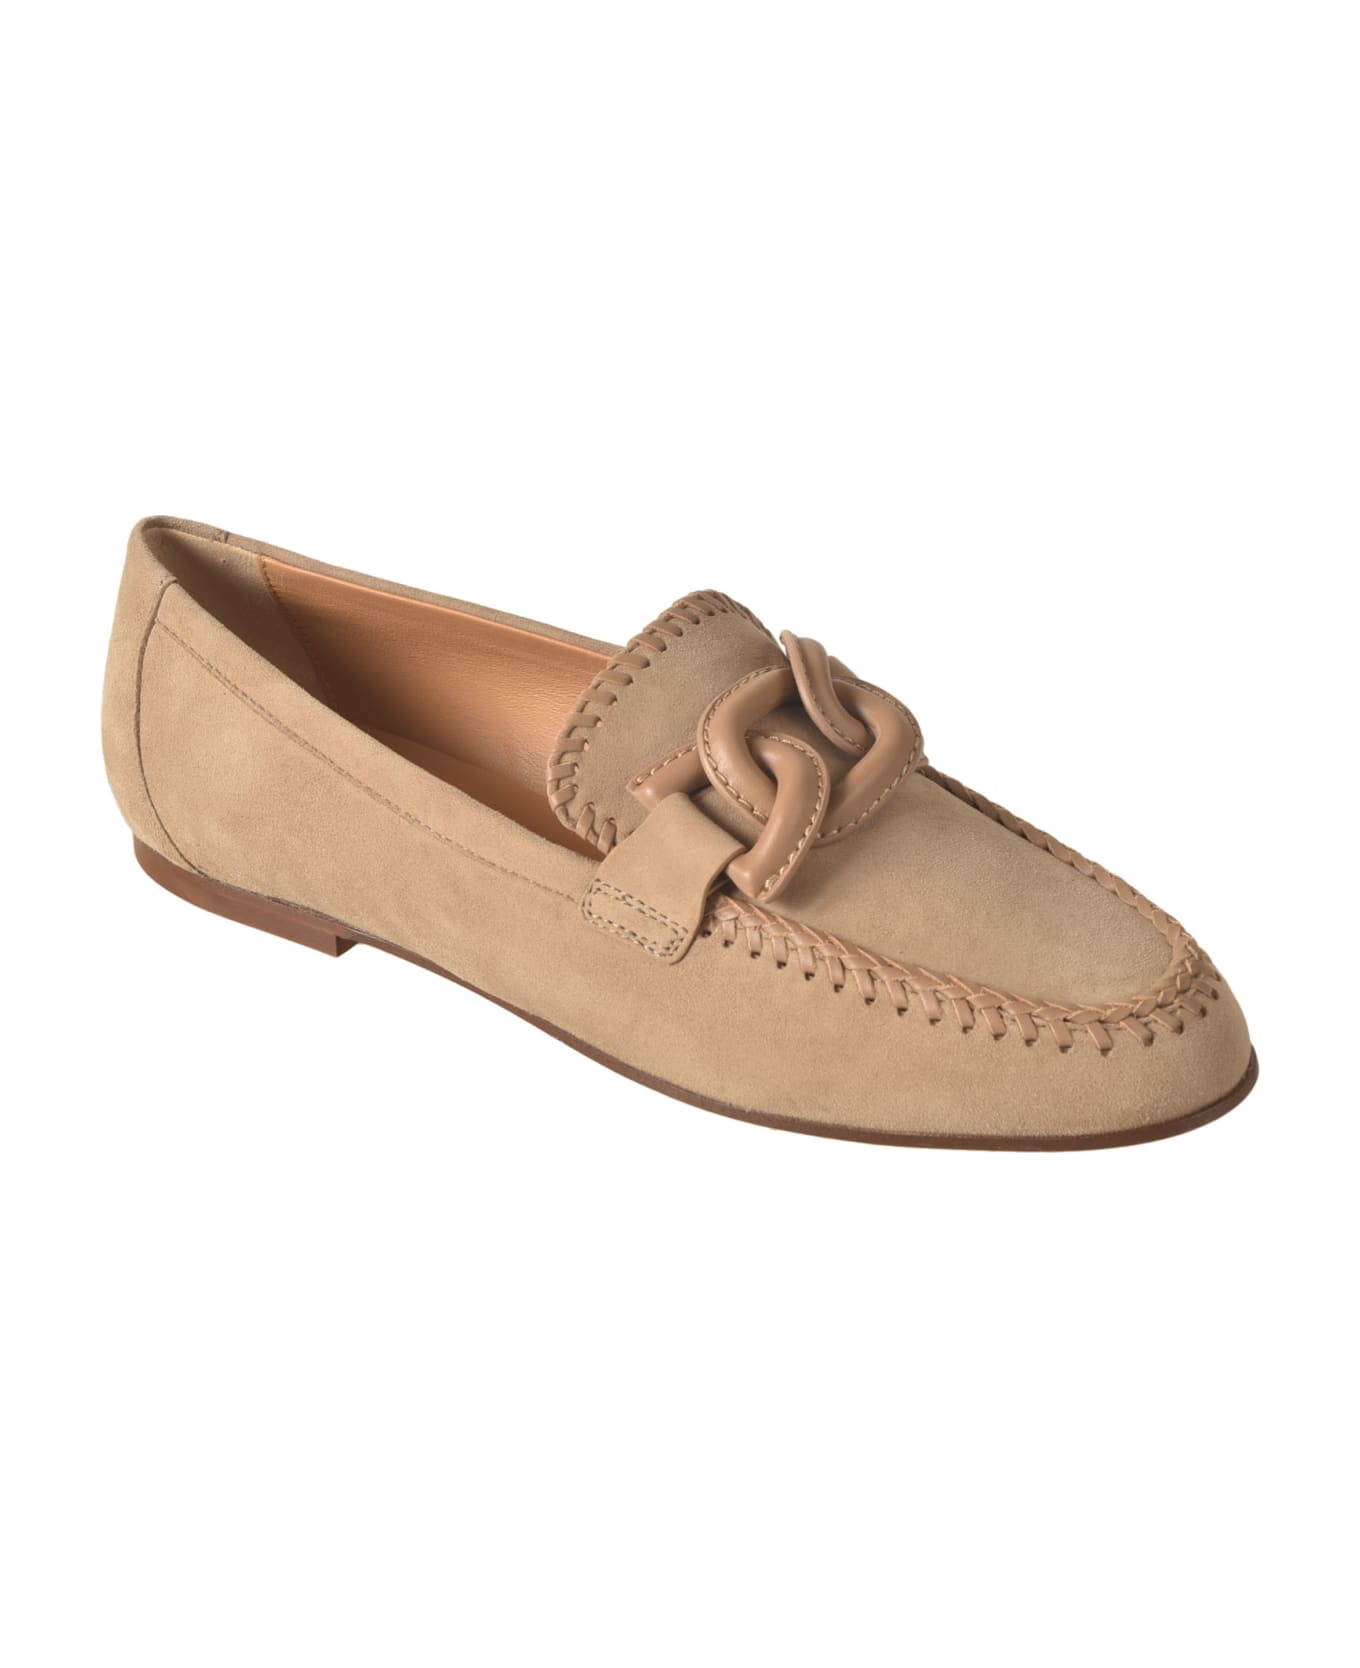 Tod's Infilatura Loafers - Cappuccino